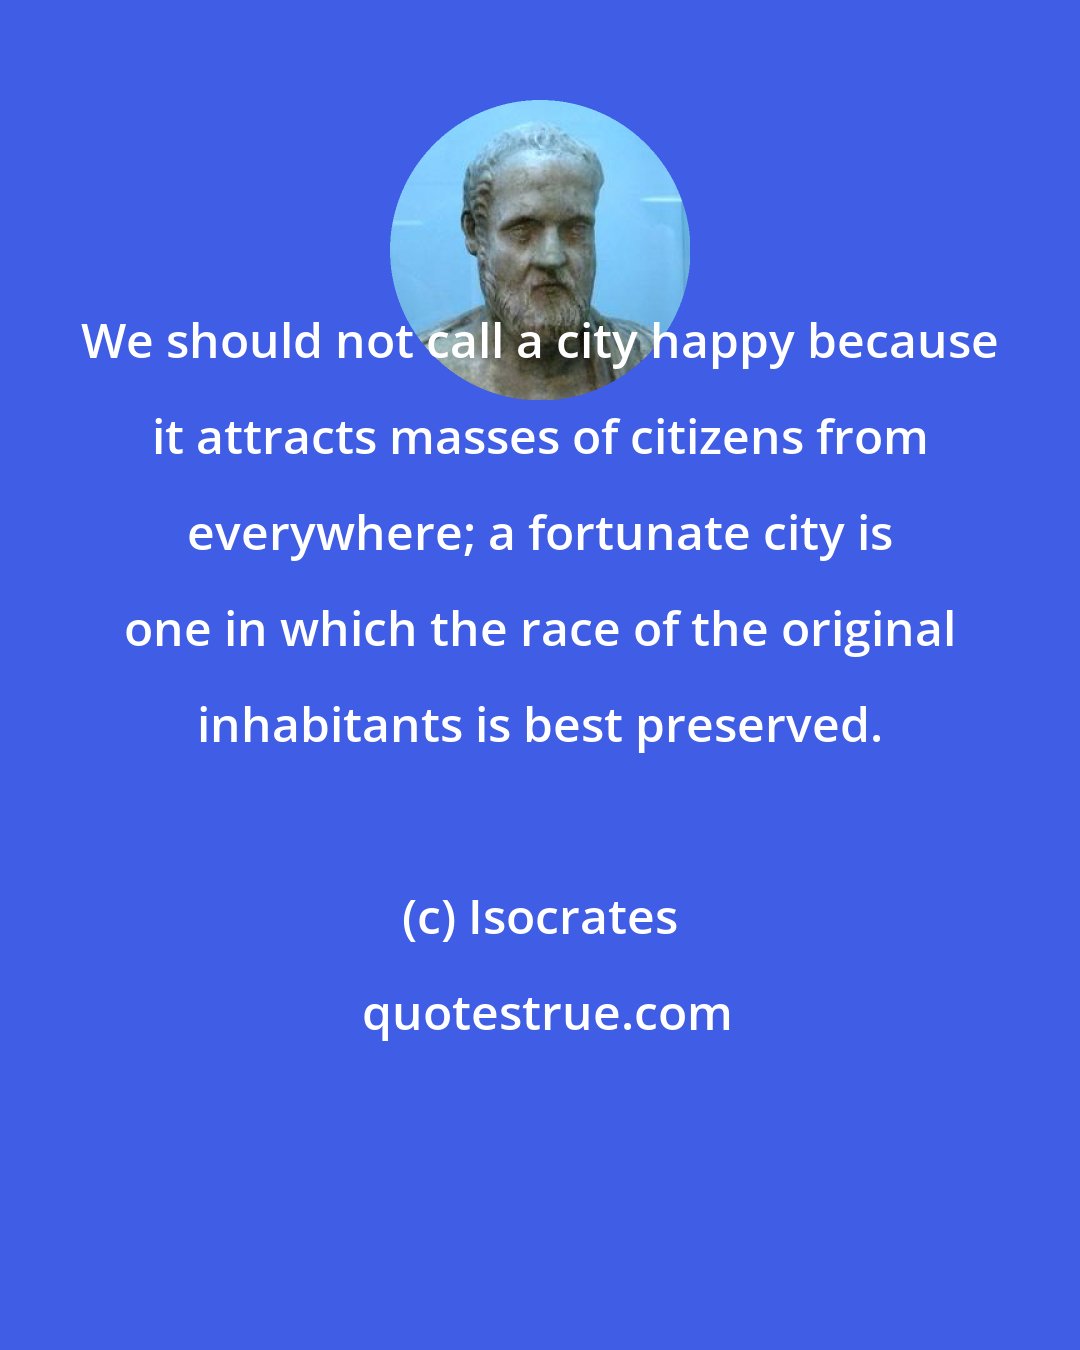 Isocrates: We should not call a city happy because it attracts masses of citizens from everywhere; a fortunate city is one in which the race of the original inhabitants is best preserved.